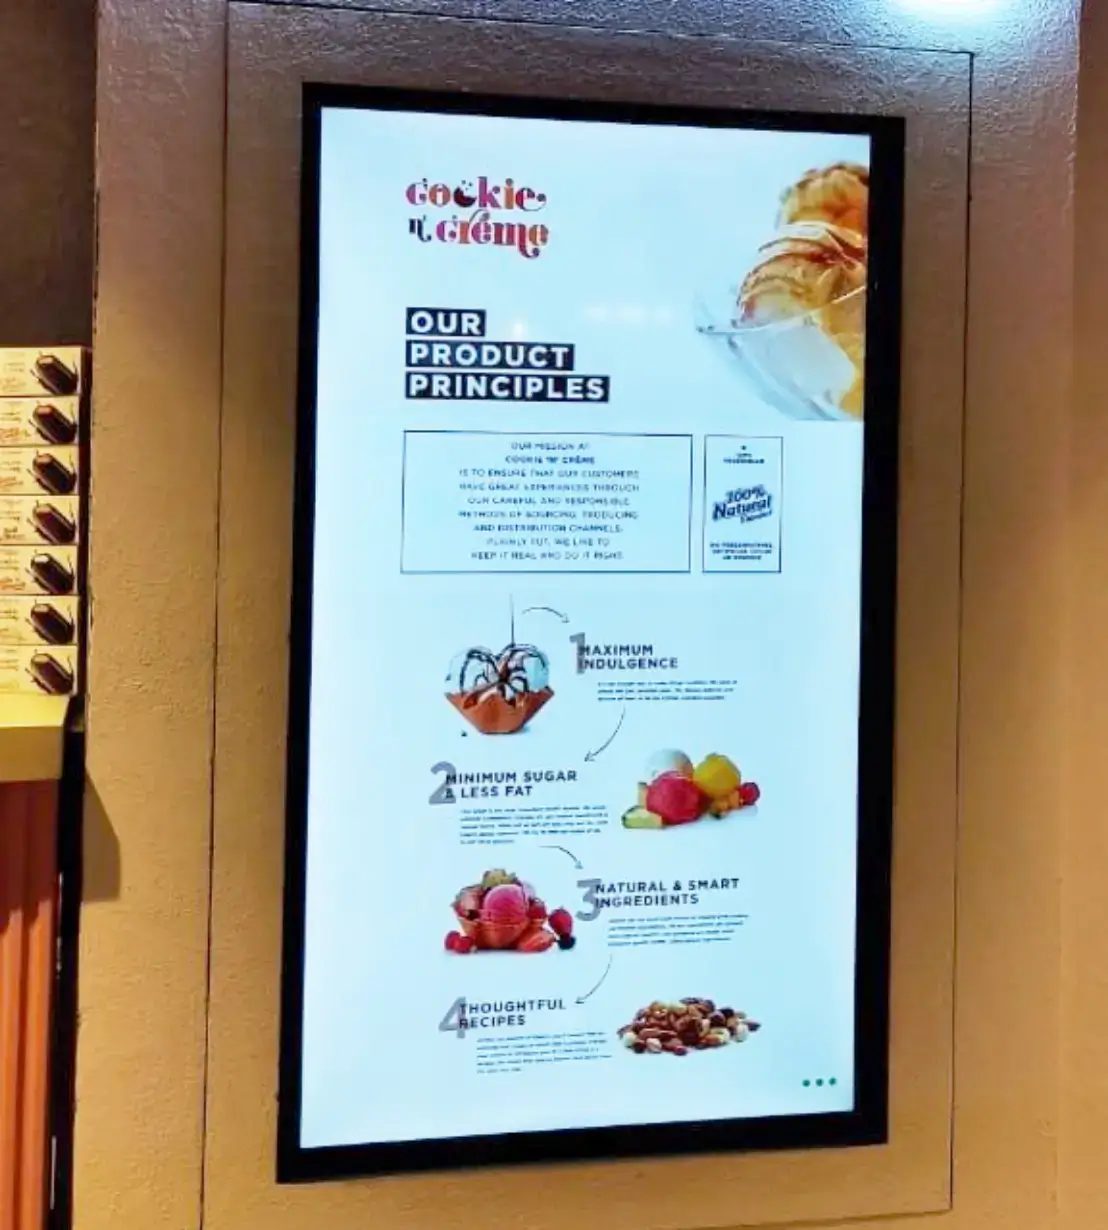 Digital signage menu content playing on a display at a cafe which is powered by Pickcel